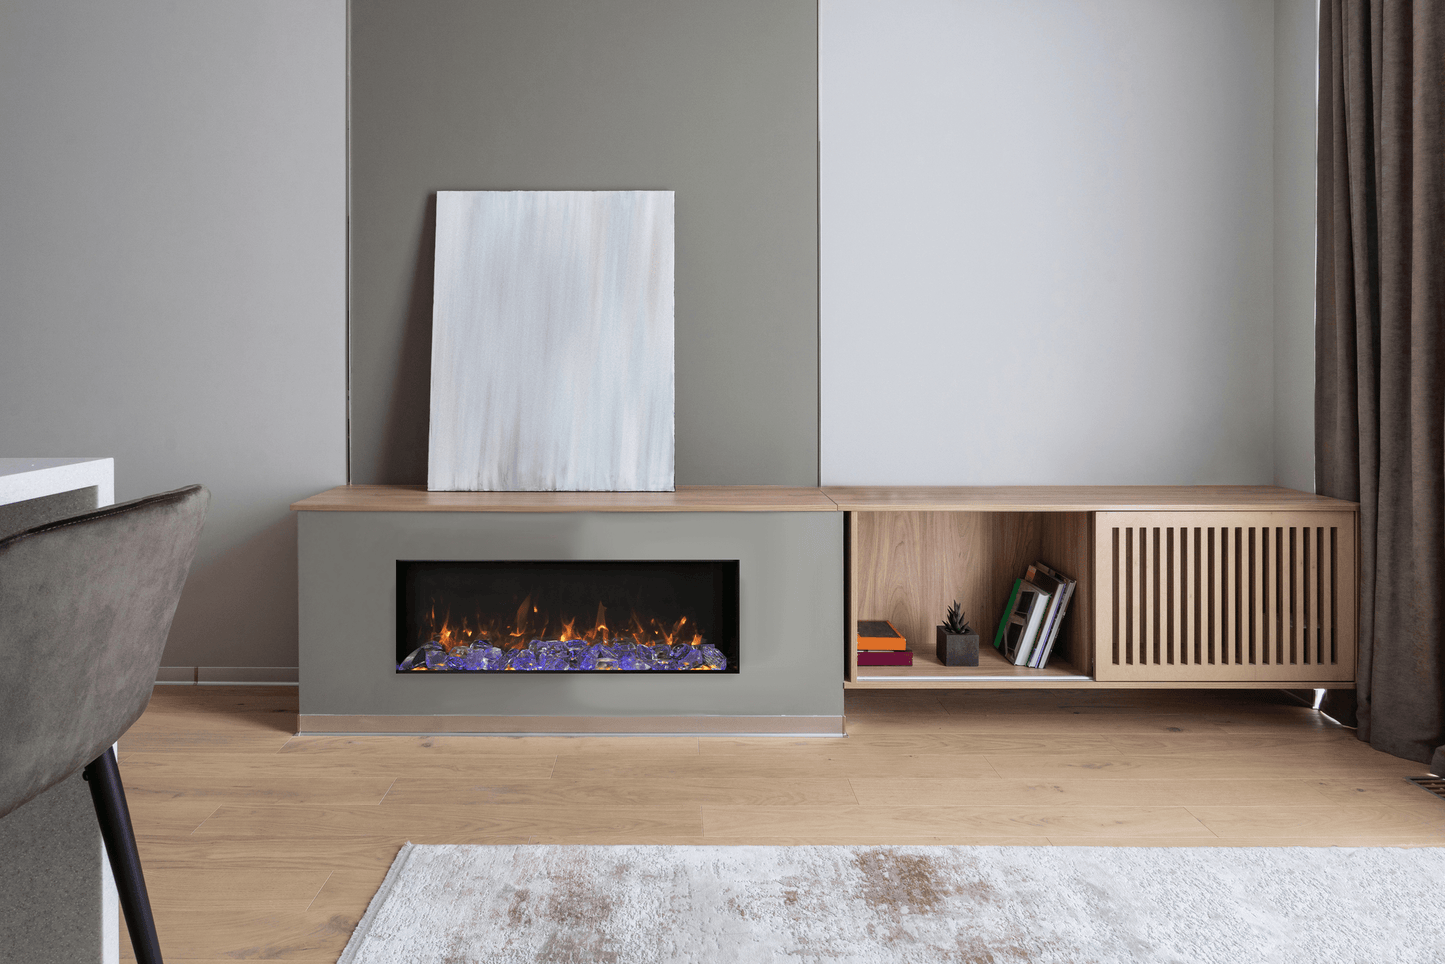 Amantii Panorama BI Slim: Smart Electric Fireplace: 5 Sizes Available - Electric Fireplace Shop